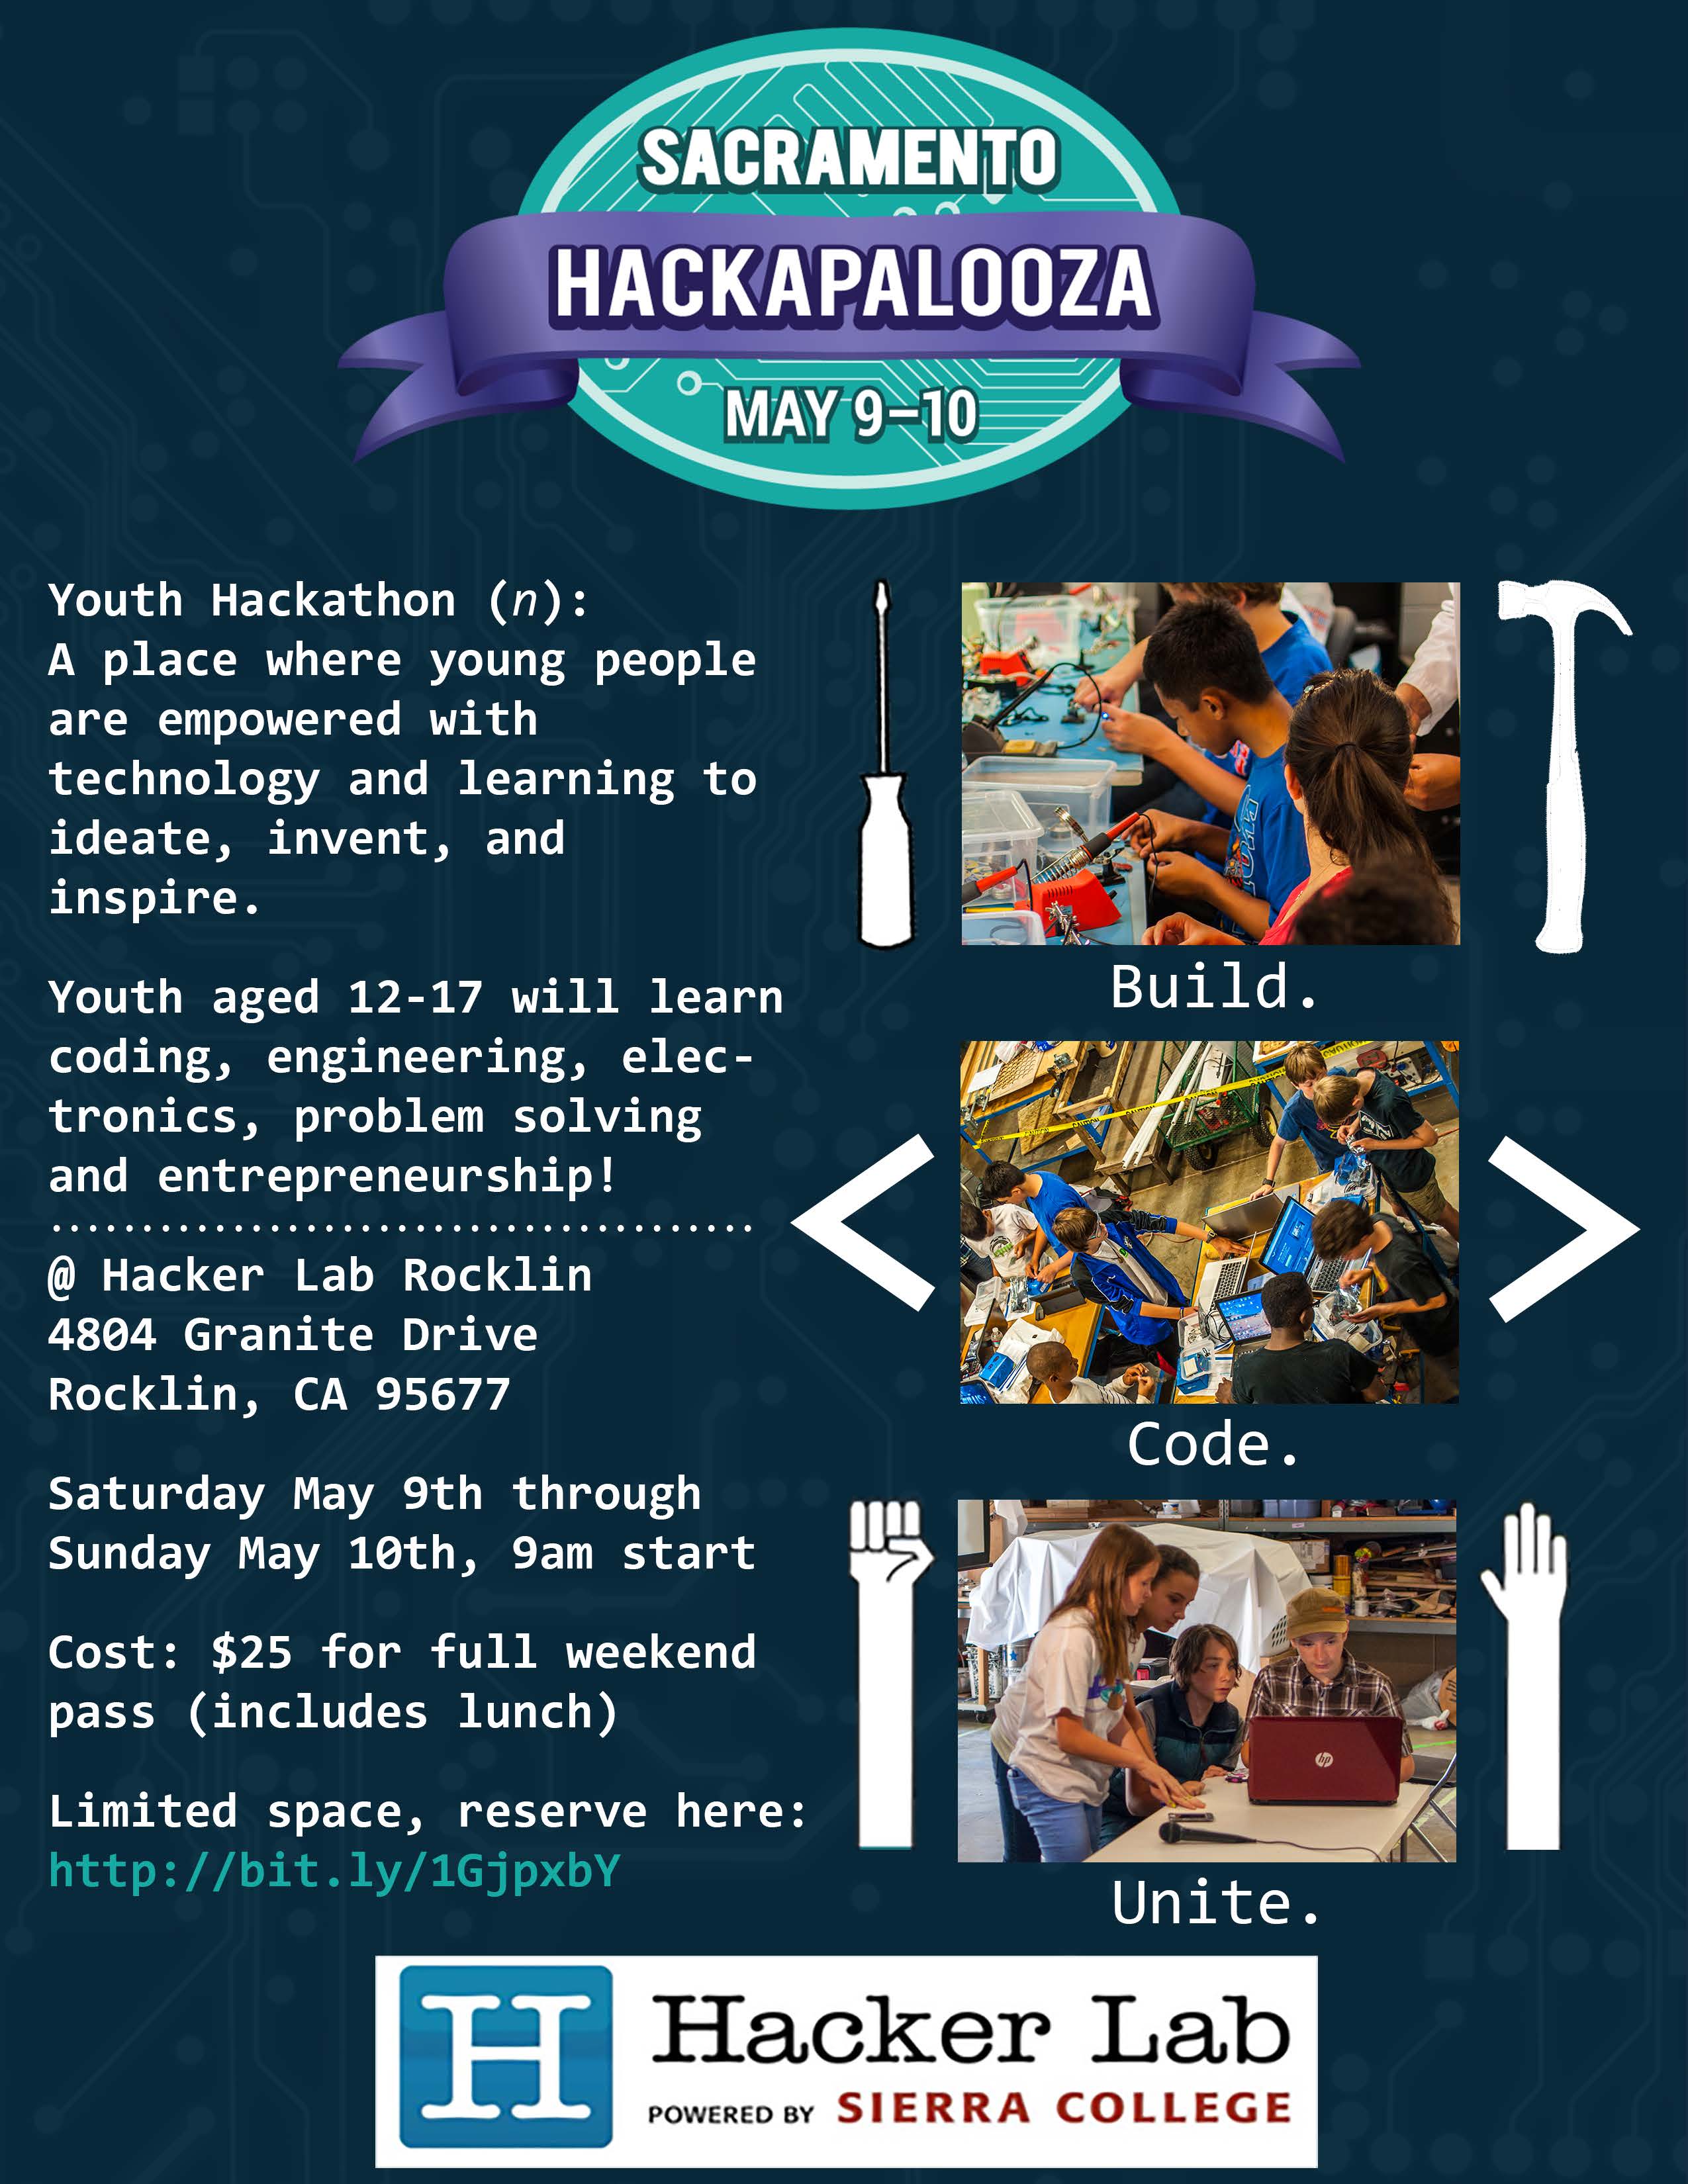 Students age 12 to 17 will learn coding, electronics, engineering, problem solving and entrepreneurship at the Sacapalooza youth Hackathon on May 9 & 10.